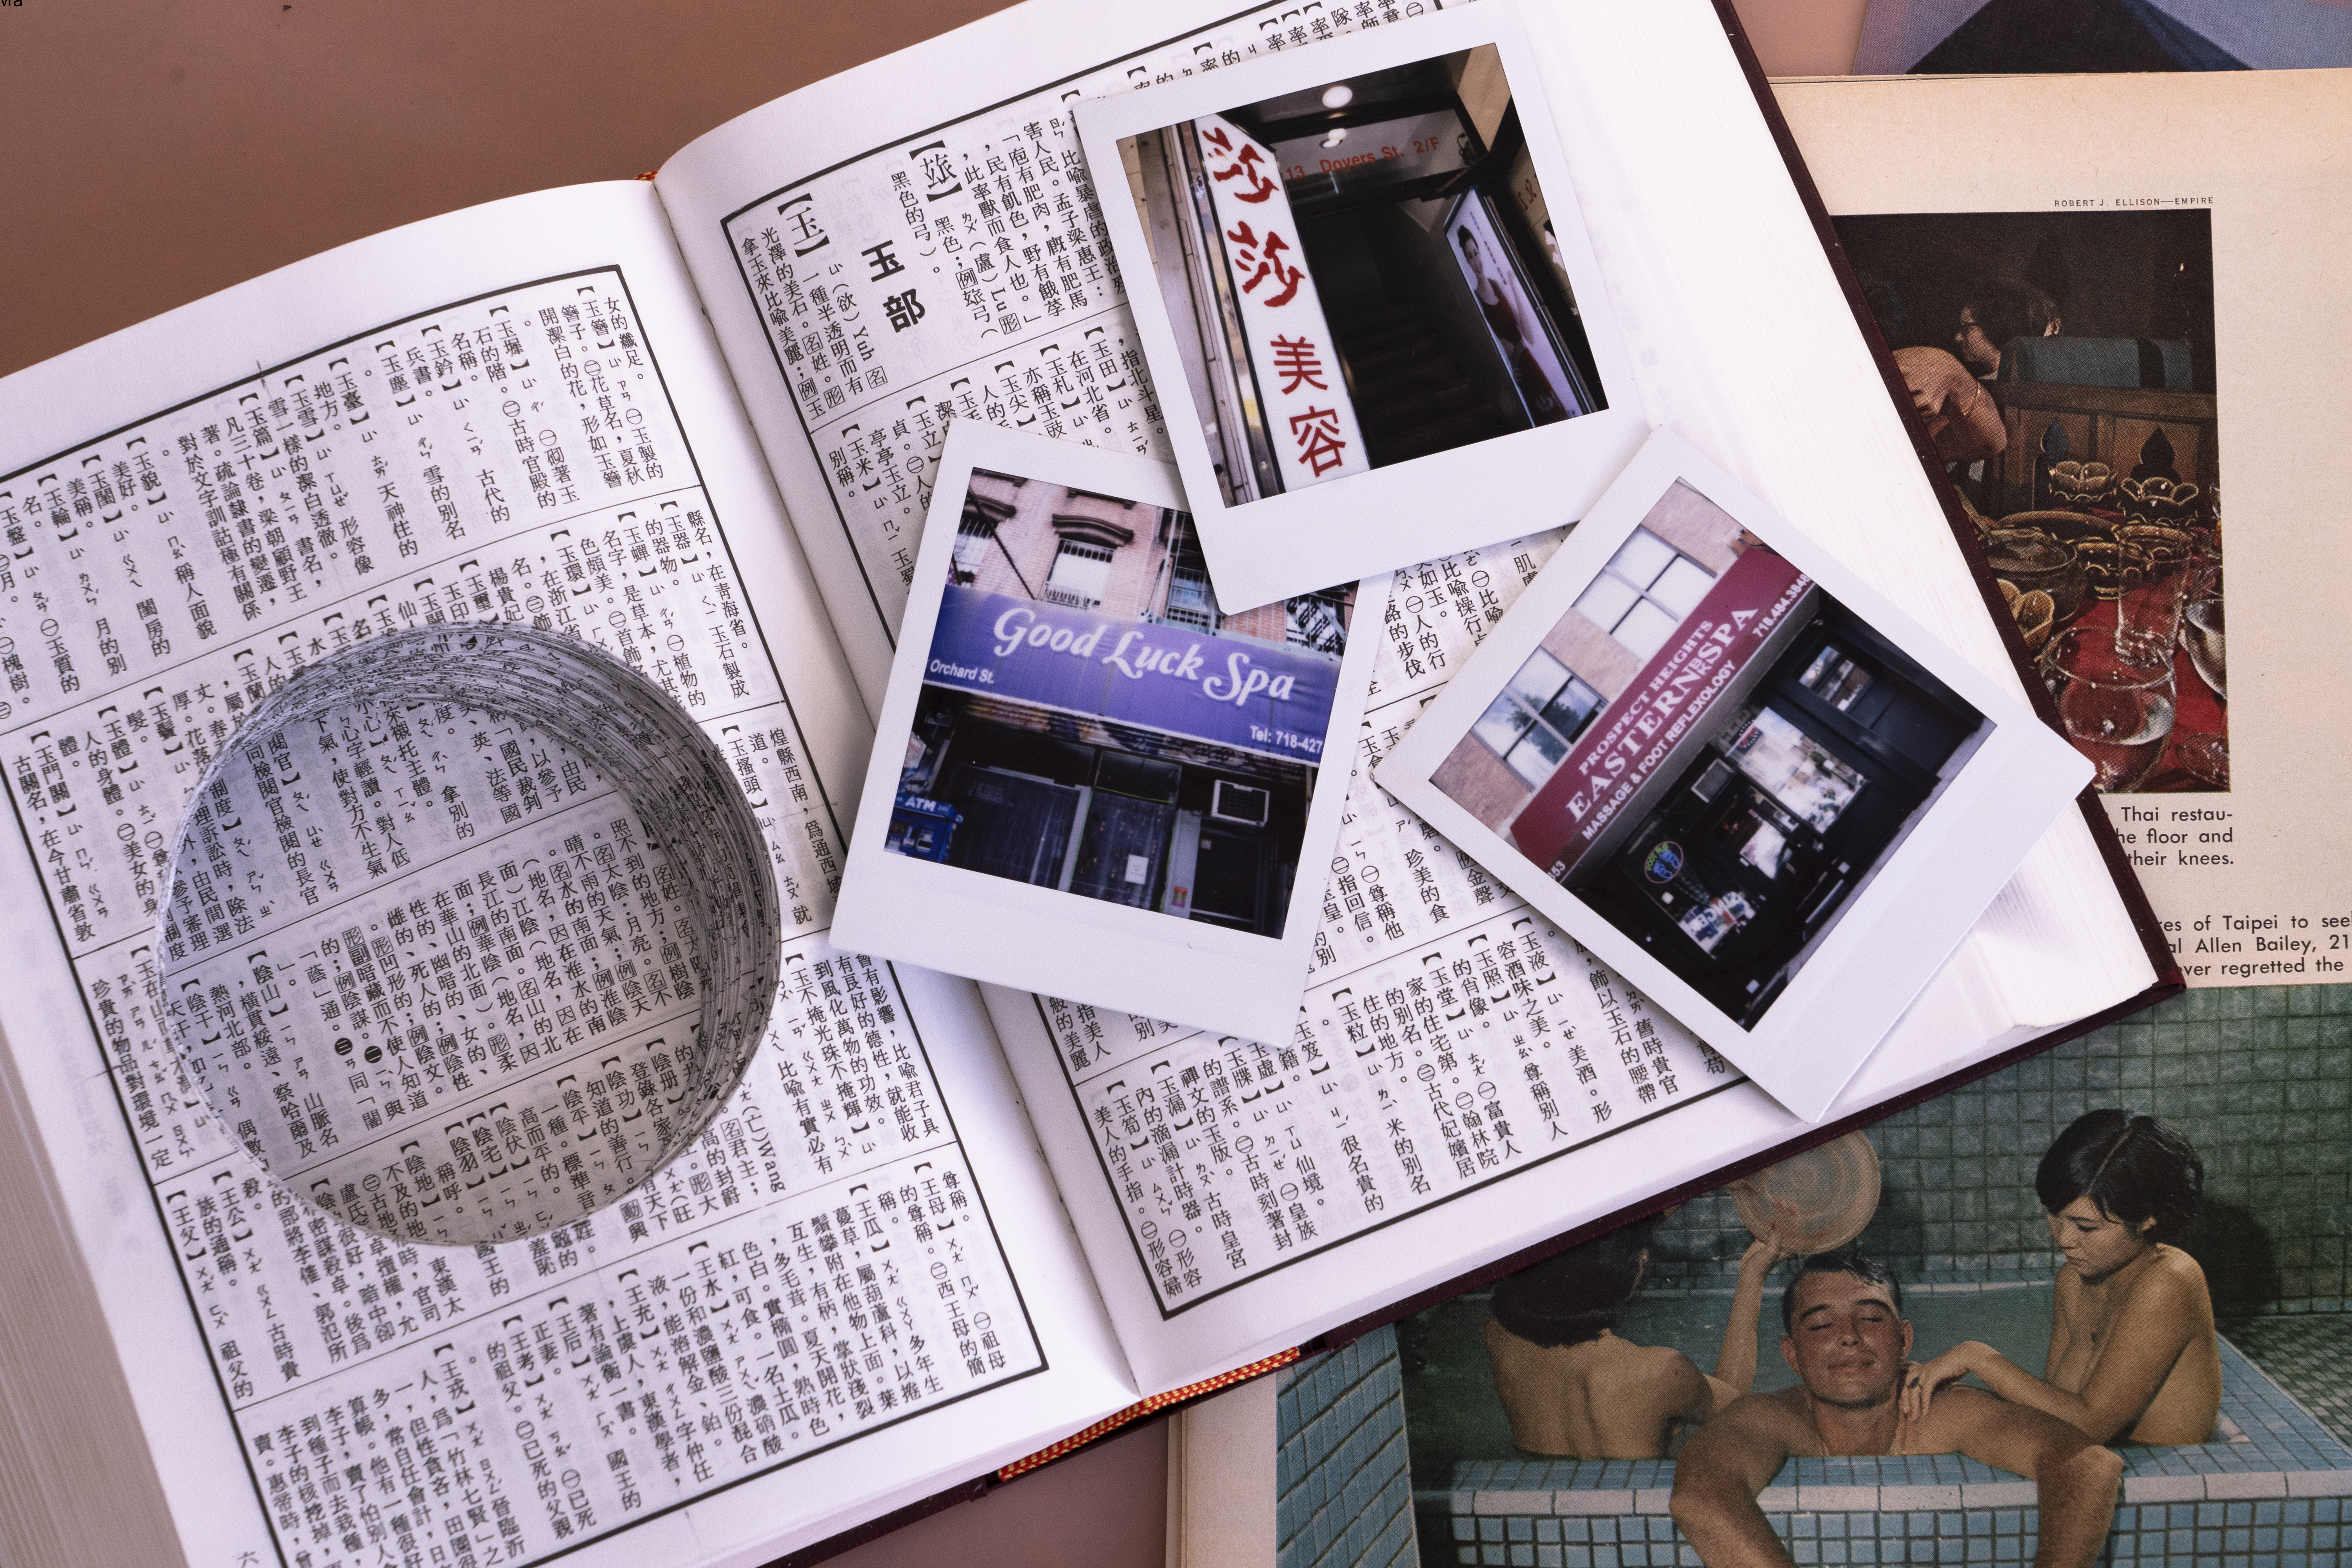 Overhead photo of an open Taiwanese dictionary. The pages on the left side of the book have been neatly cut with circular holes, creating a precise empty cylinder, about one inch in depth. Three polaroids are laid on top of the right side of the book, each shows the sign for an Asian massage parlor: “Good Luck Spa”, “Prospect Heights EASTERN SPA Massage and Foot Reflexology” and a sign in Chinese characters. Below the dictionary there is an open book that shows a Time magazine photo of a White man in a Japanese style tiled bath with young Asian spa workers massaging and bathing him.